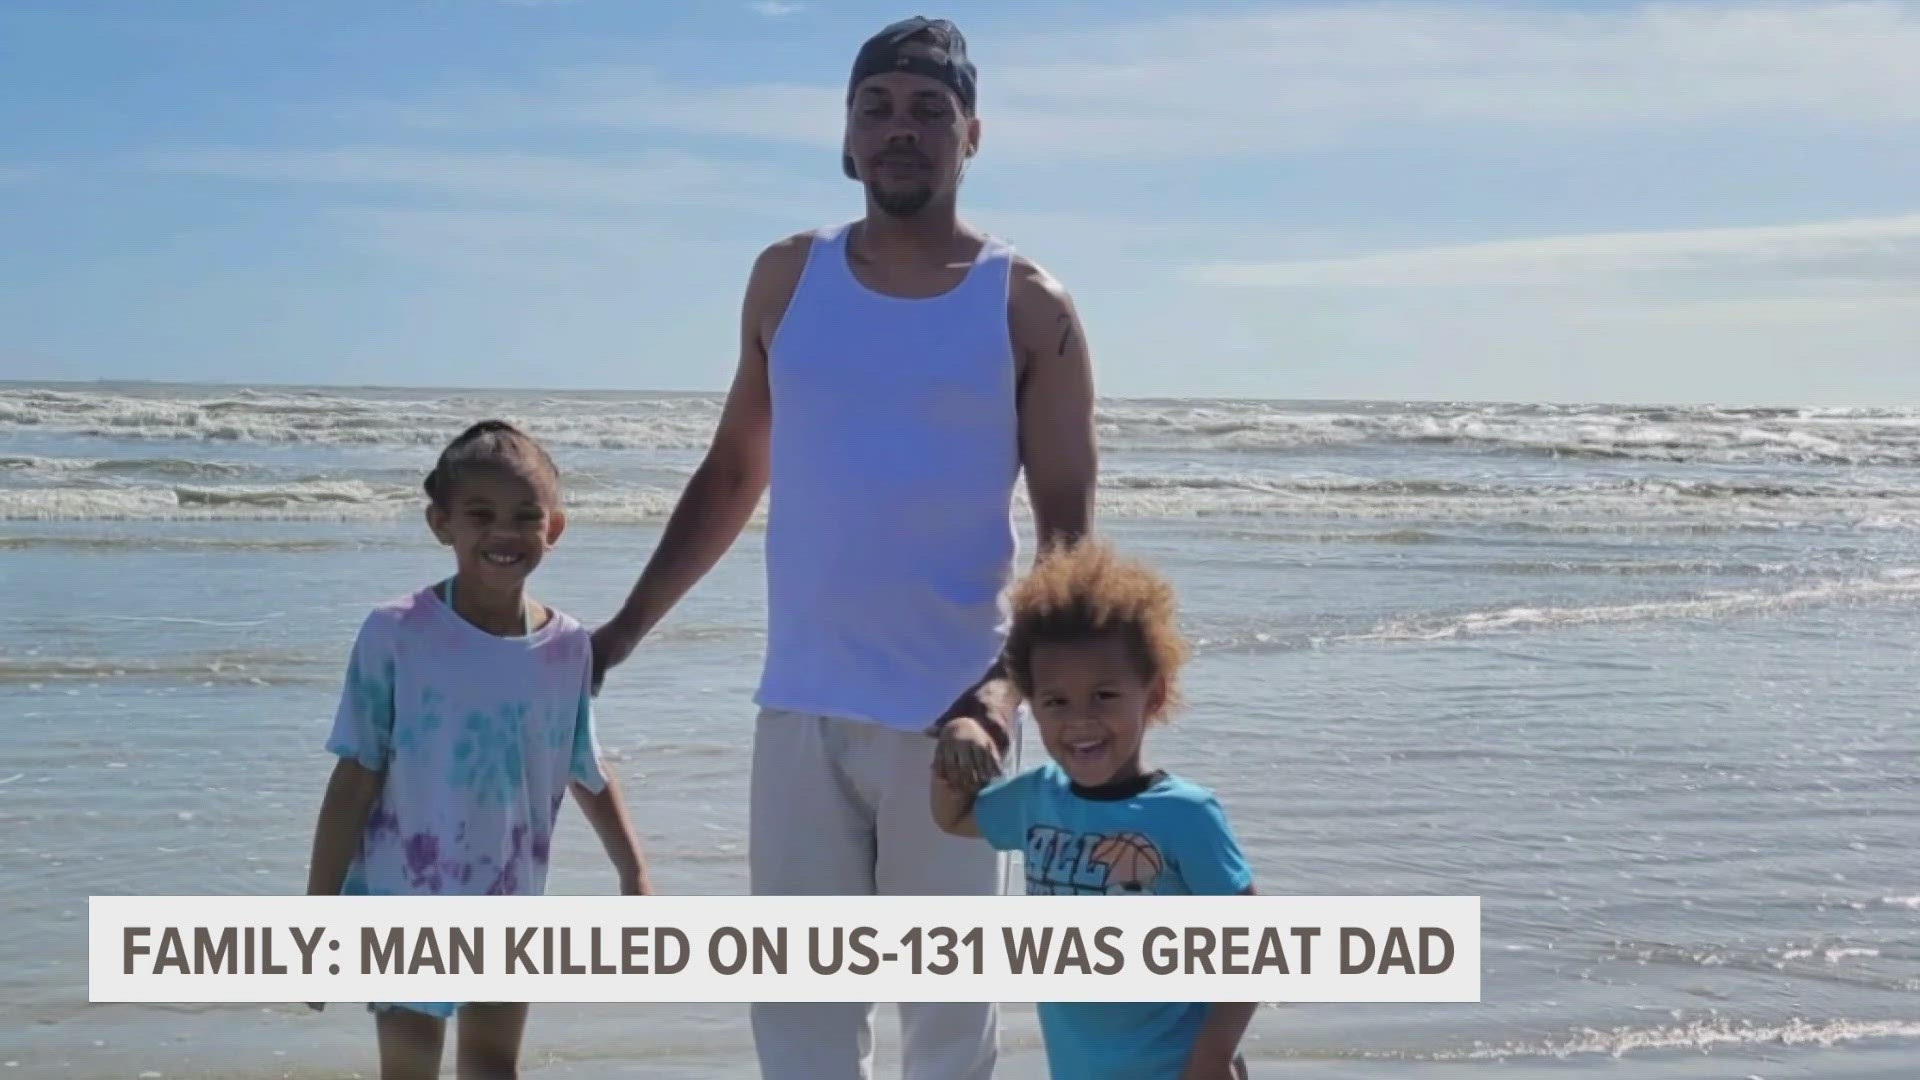 Smith was killed in front of his seven-year-old and five-year-old children, so the family is putting on a brave face for them.